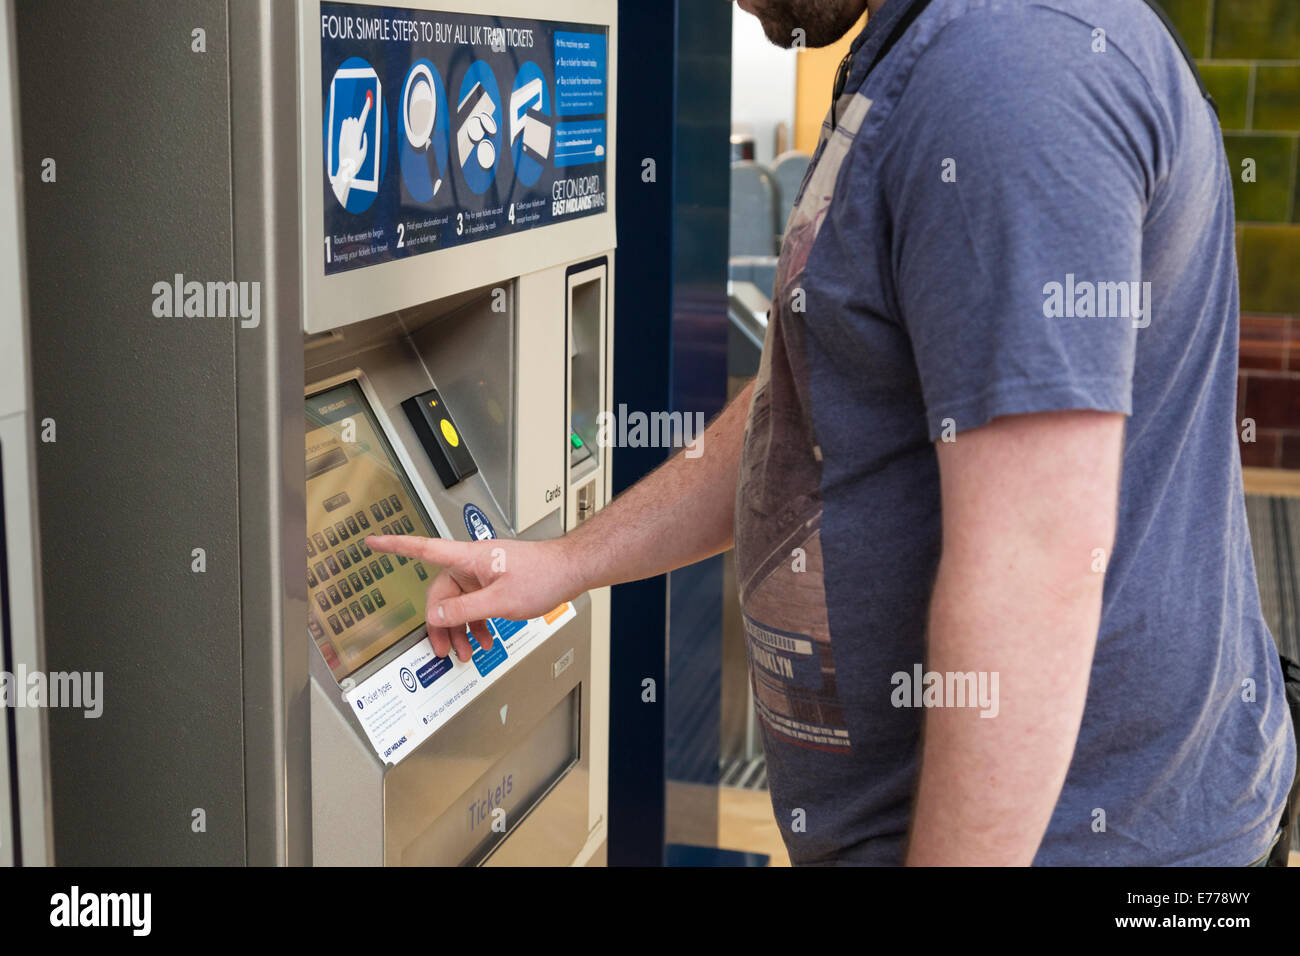 Person buying a train ticket at a ticket machine in a railway station, Nottingham, England, UK Stock Photo